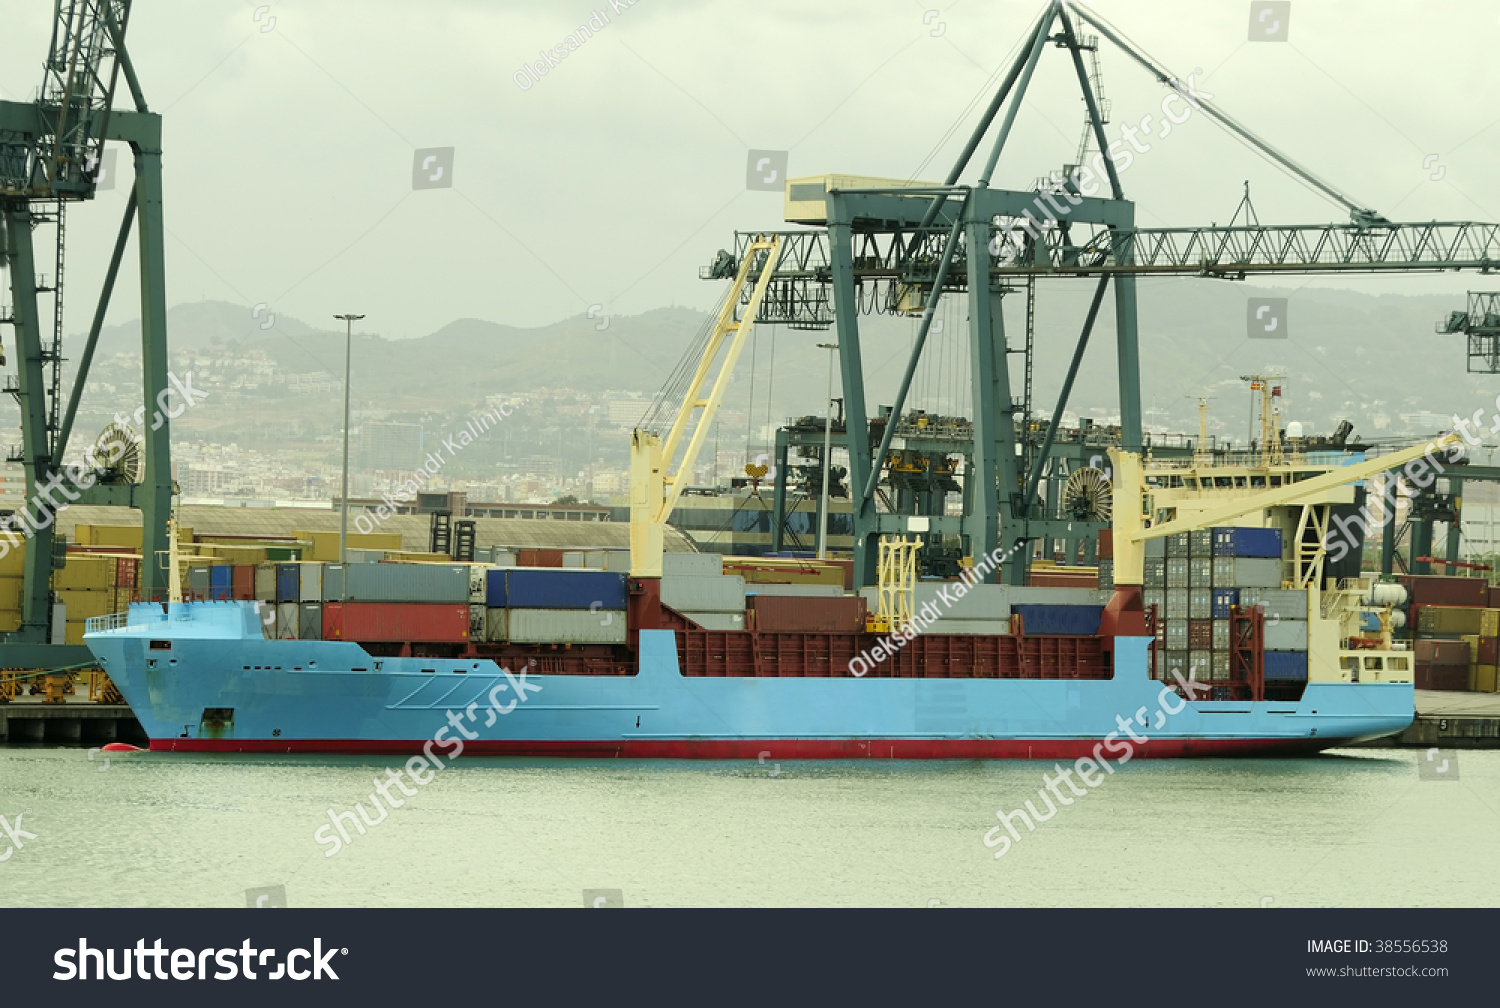 Shipping port with cranes and container ship #38556538